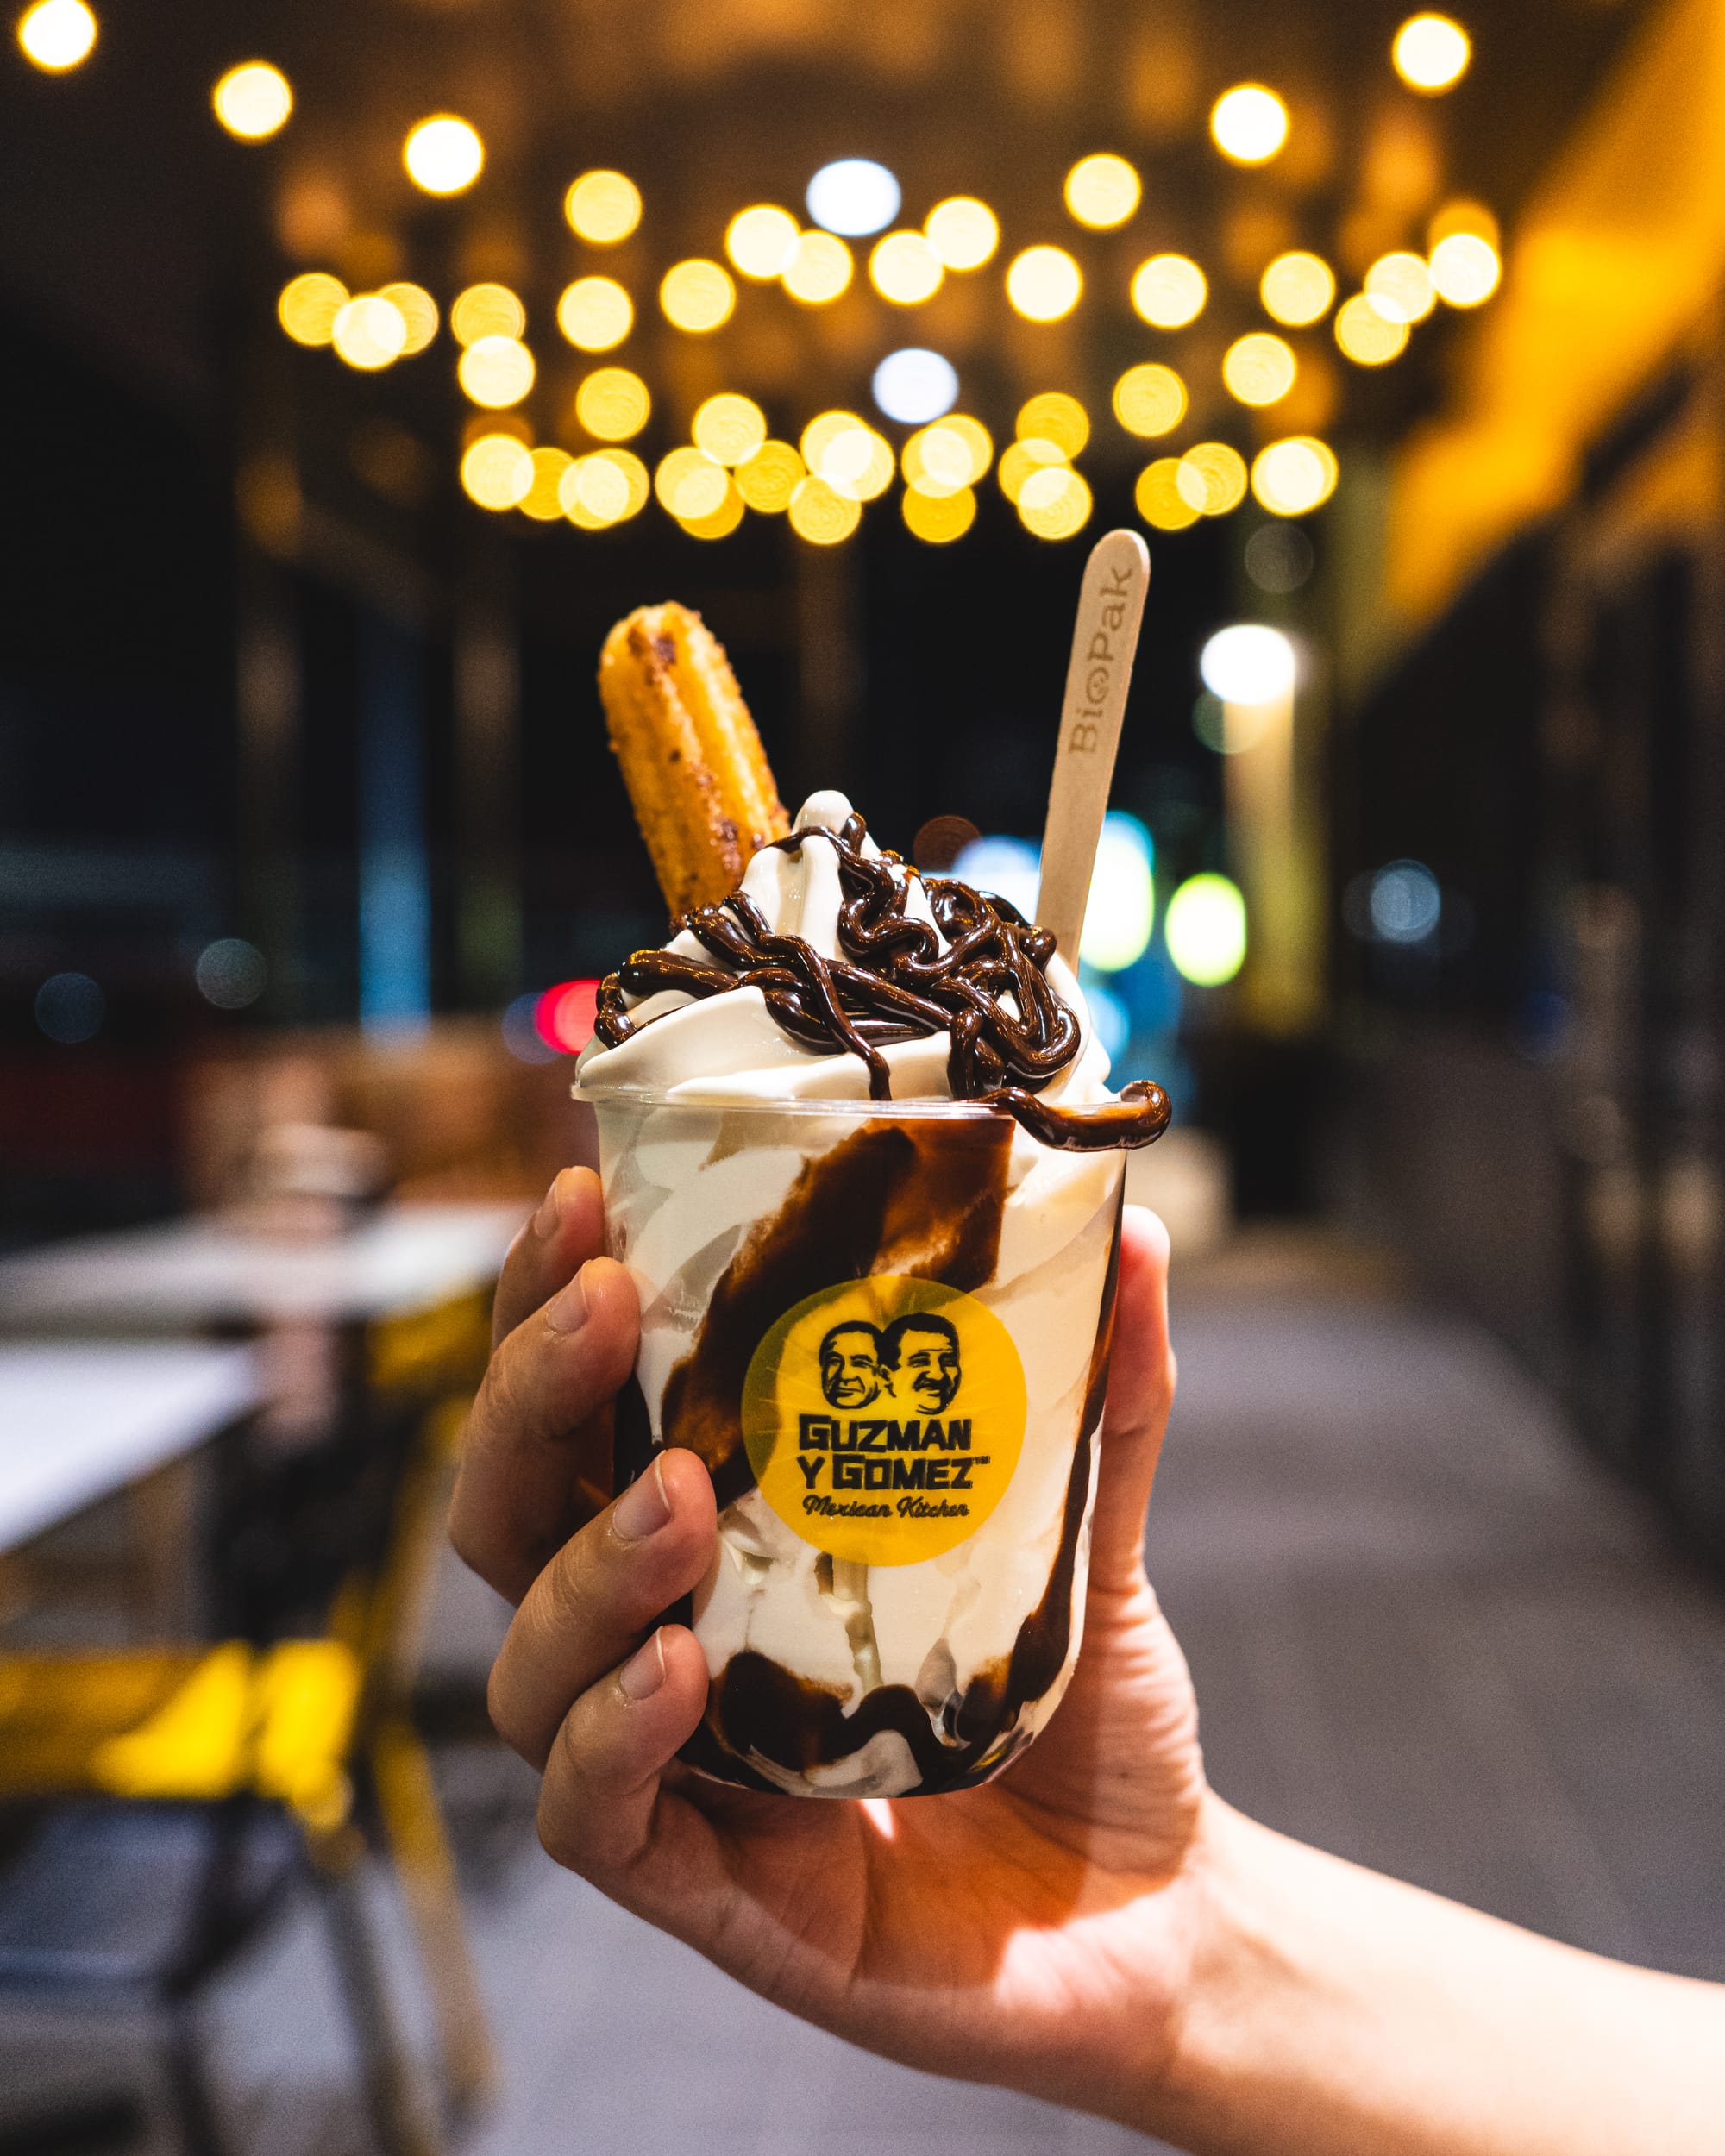 Hand holding soft serve with a churro served in a plastic Guzman y Gomez cup